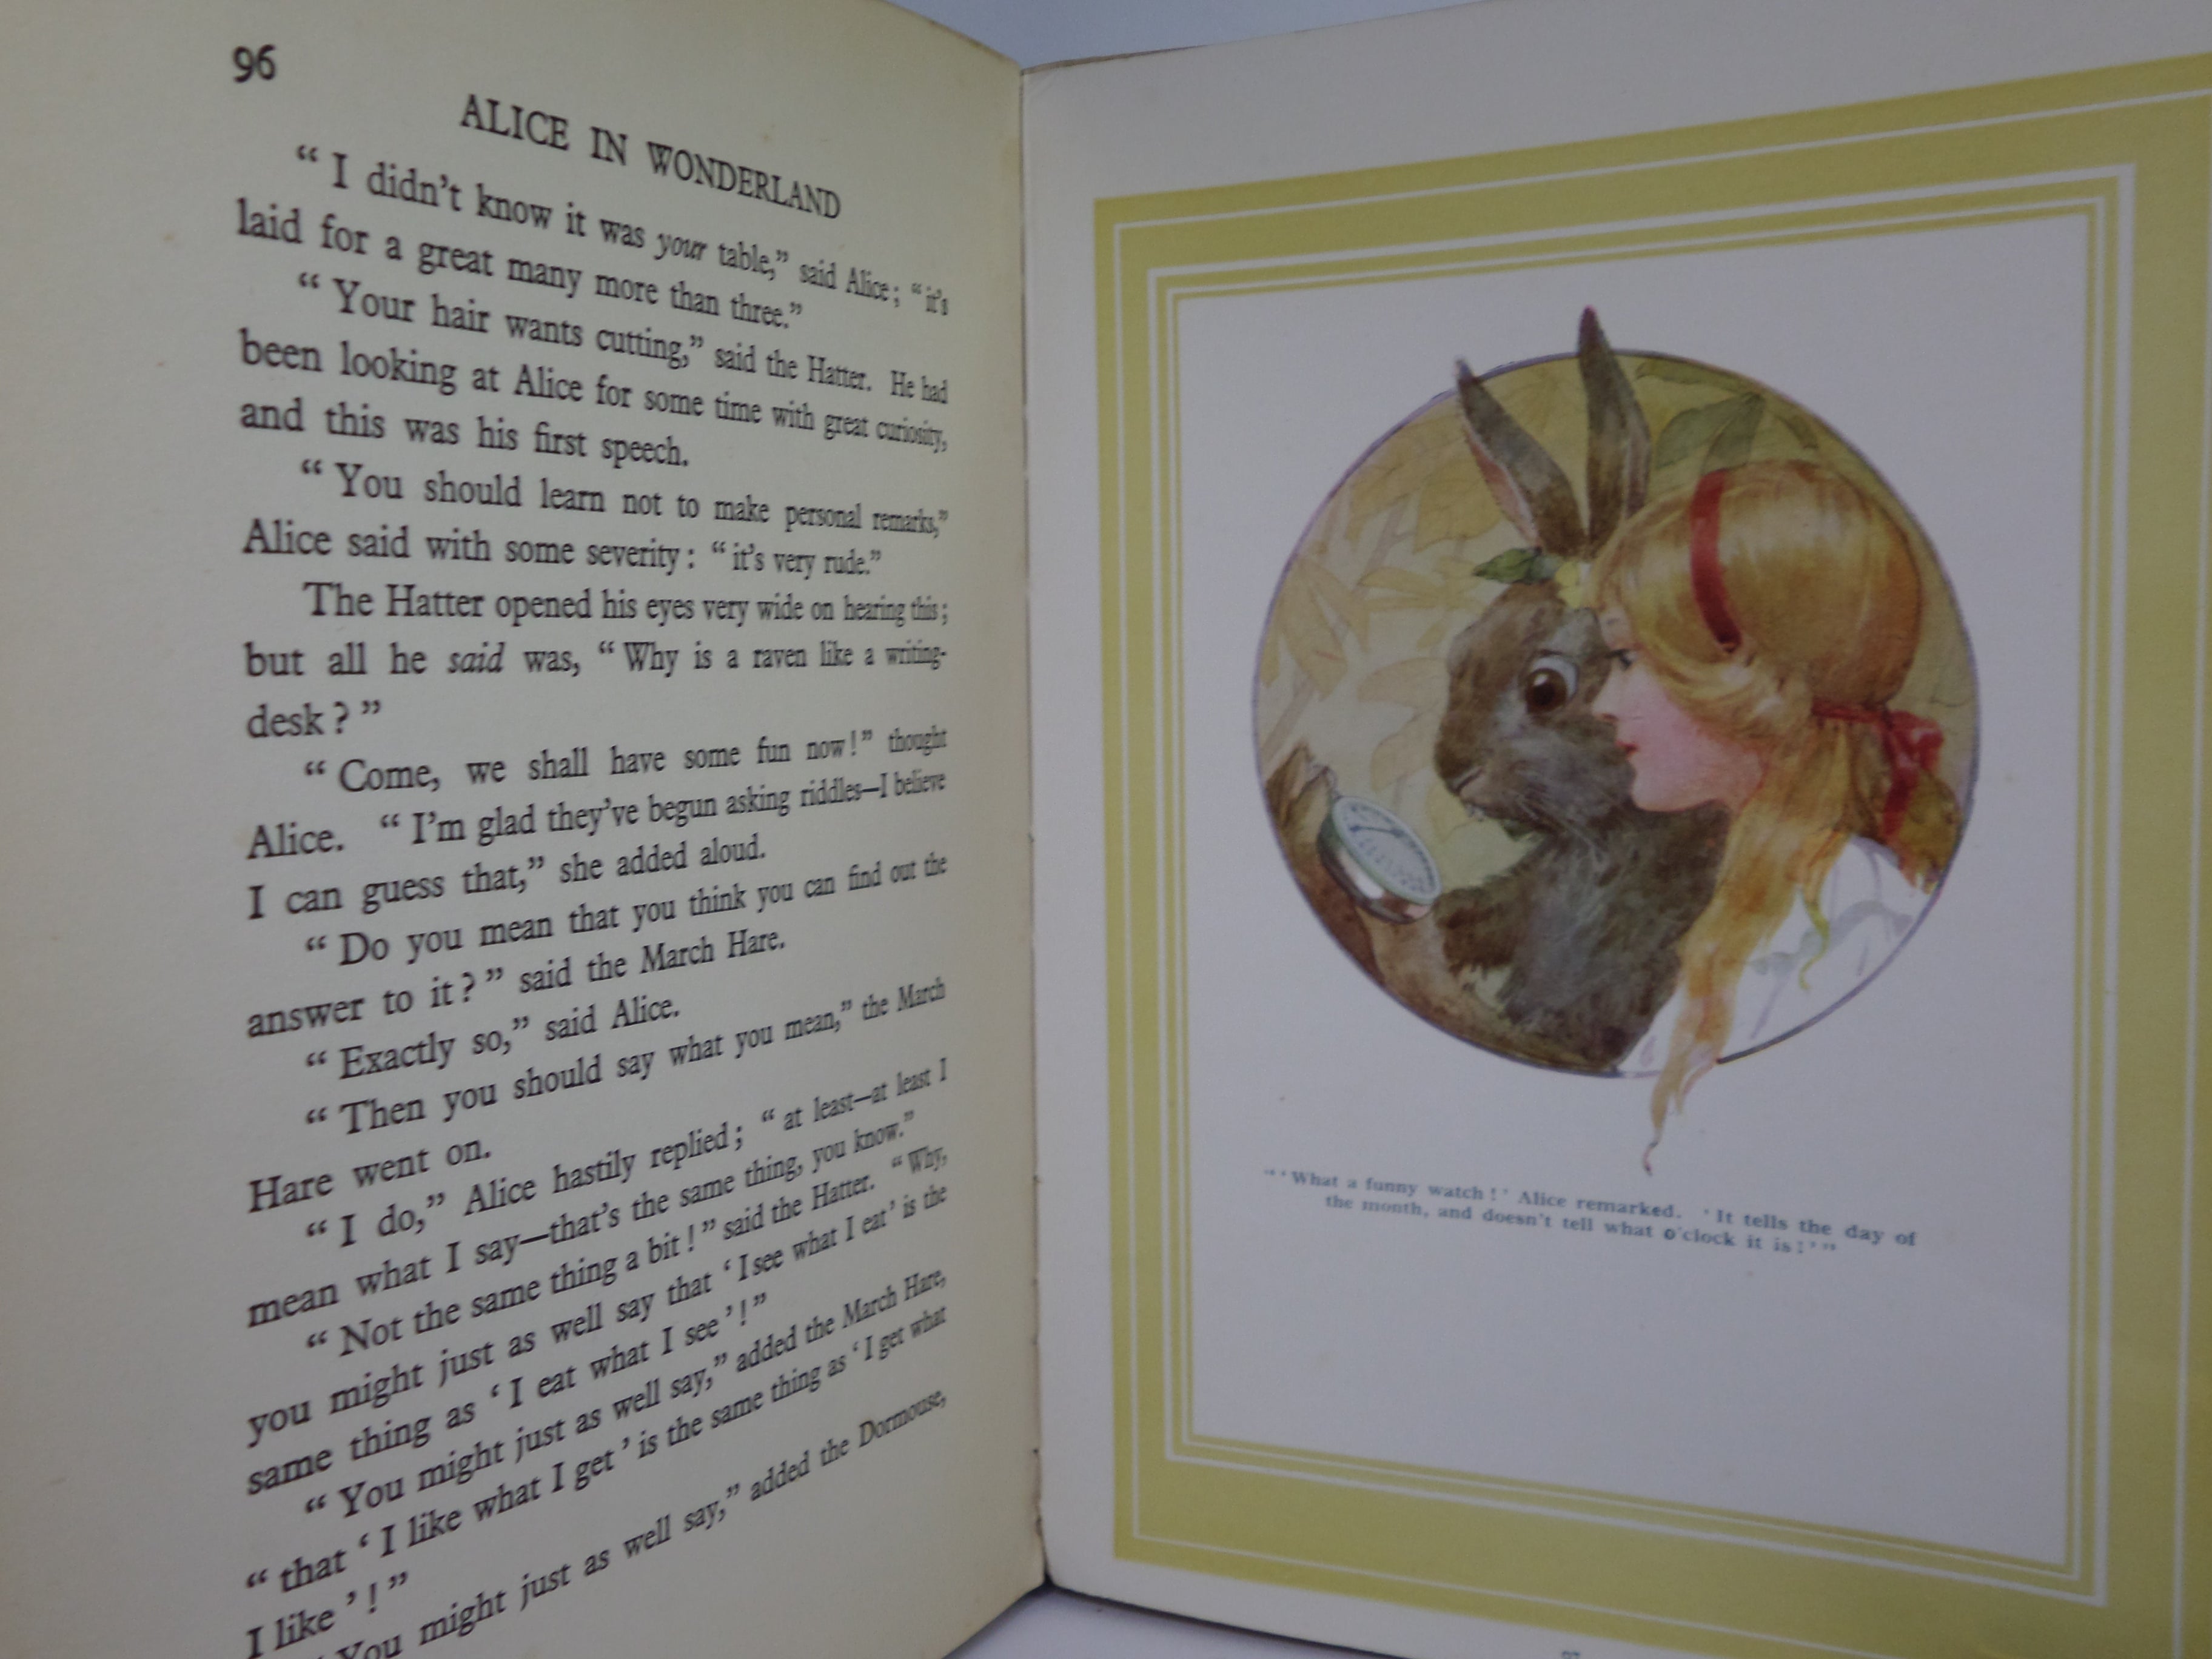 ALICE'S ADVENTURES IN WONDERLAND BY LEWIS CARROLL, ILLUSTRATED BY MARGARET TARRANT